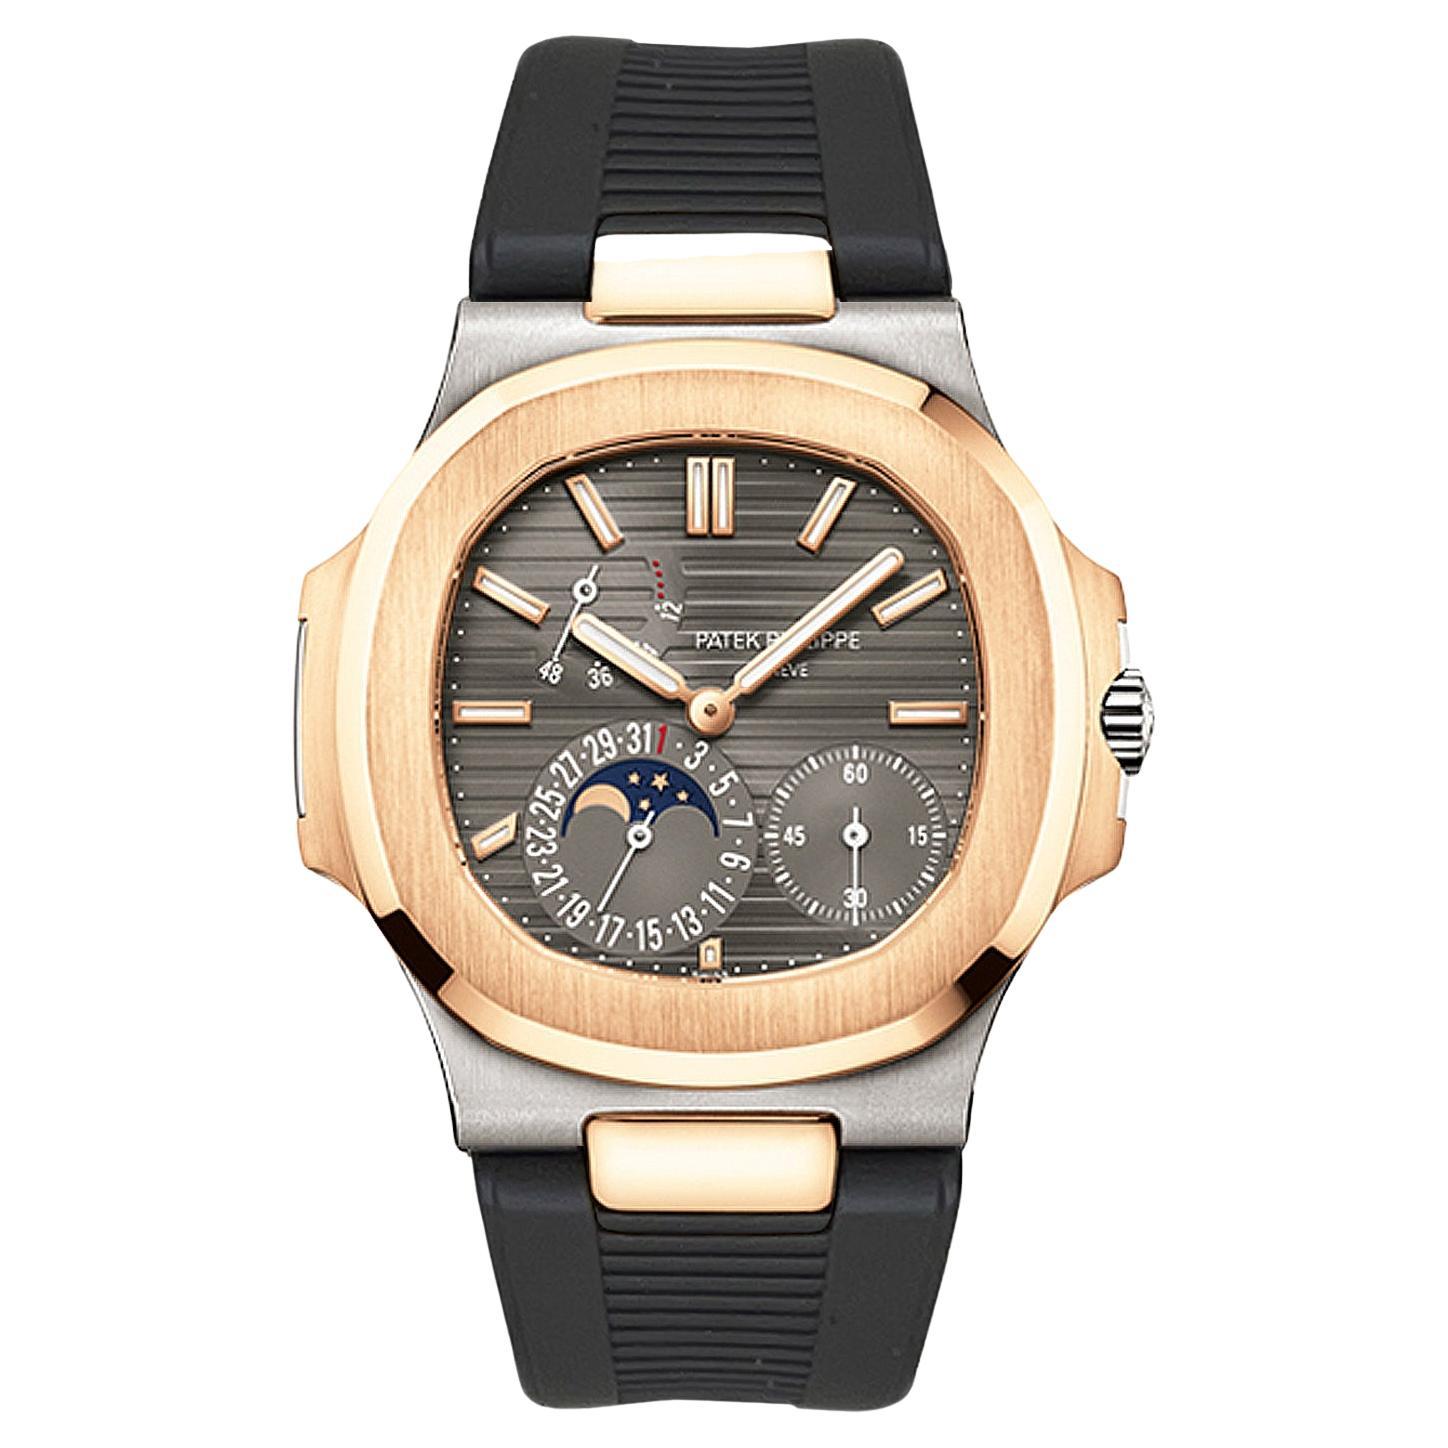 How do I set the time on a Patek Philippe watch?